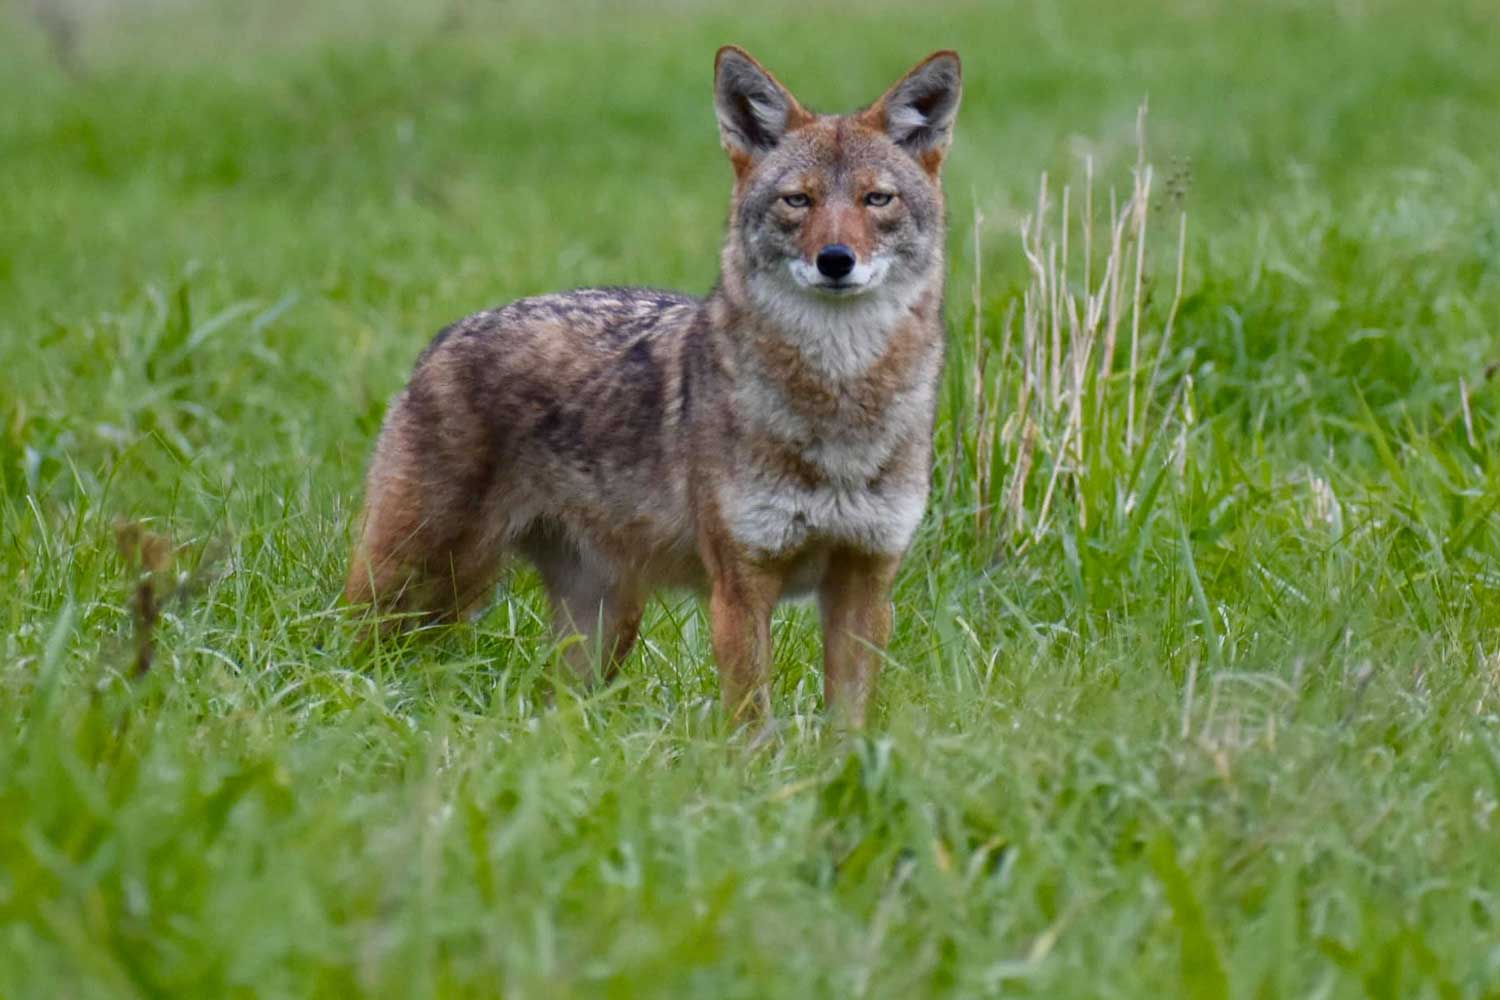 A coyote standing in long grass.